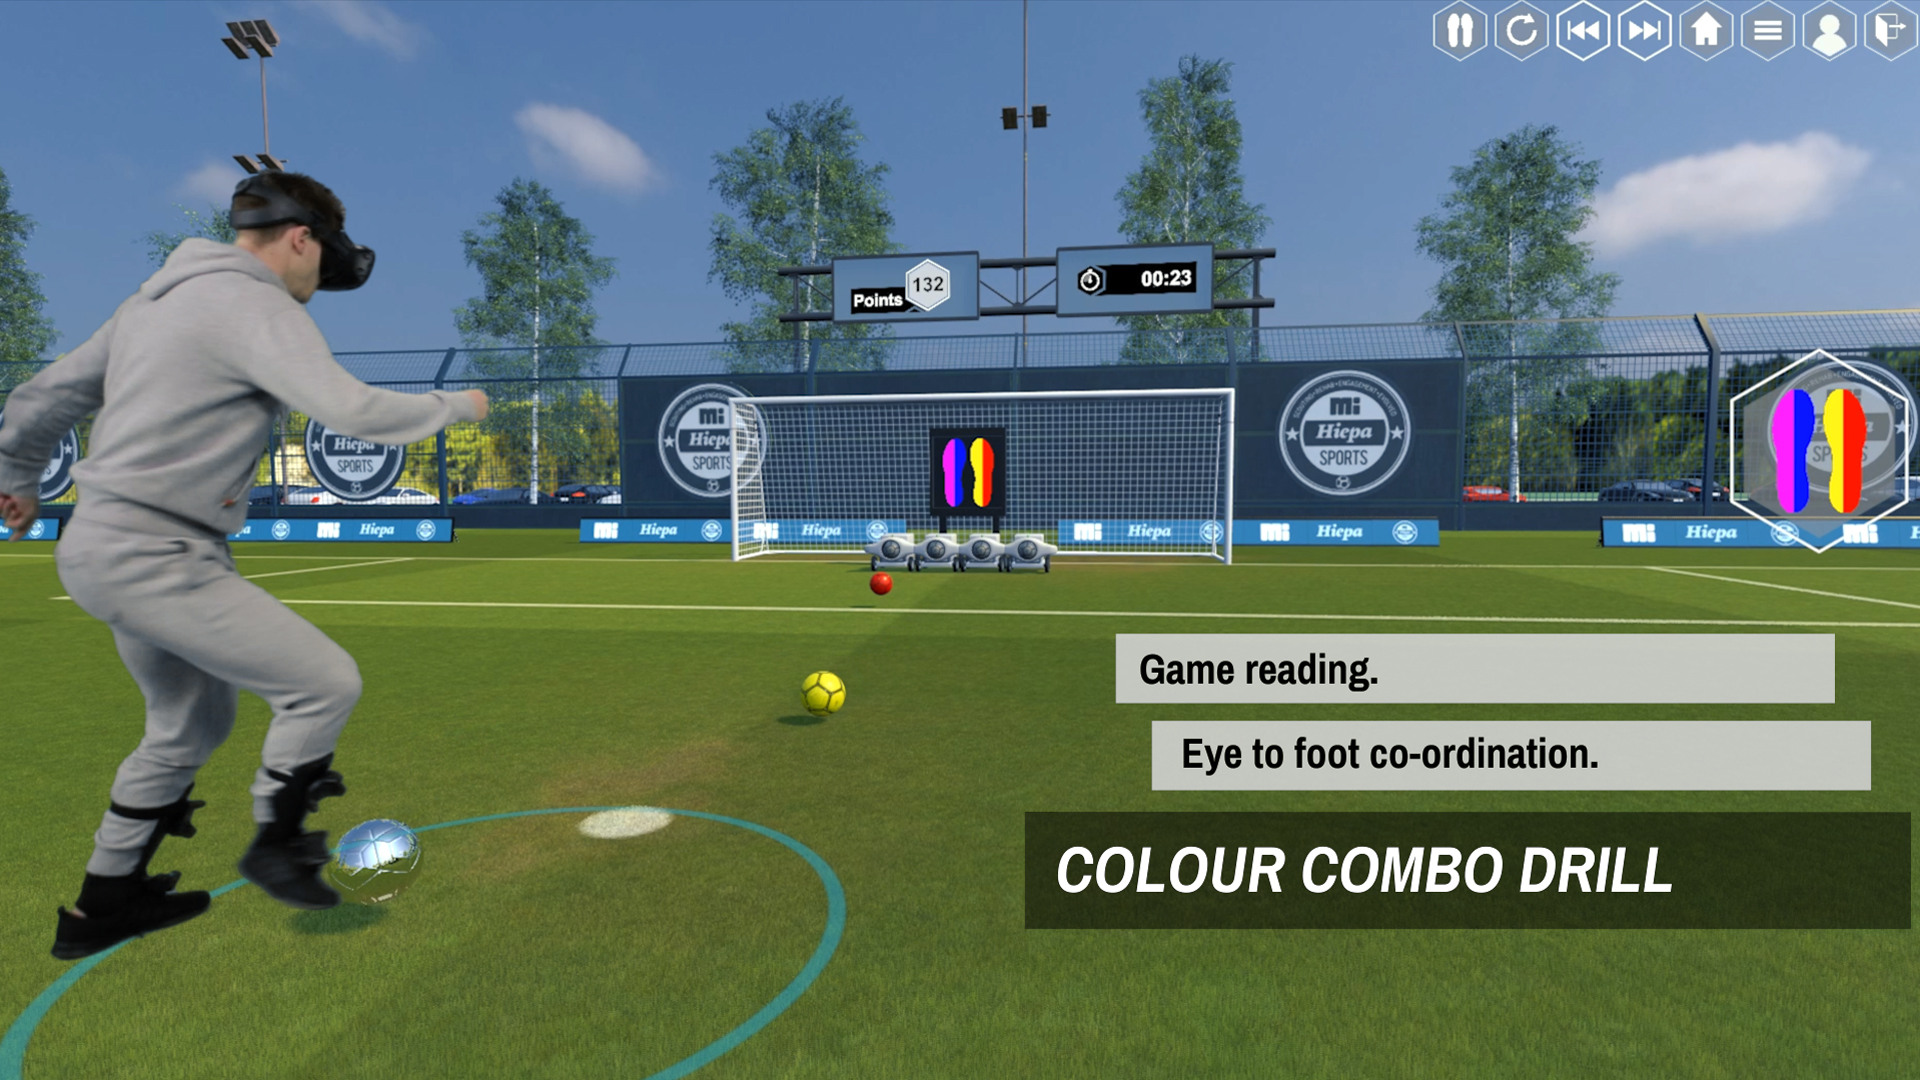 Combining Vr With Esports To Train The Next Big Soccer Star Vrscout